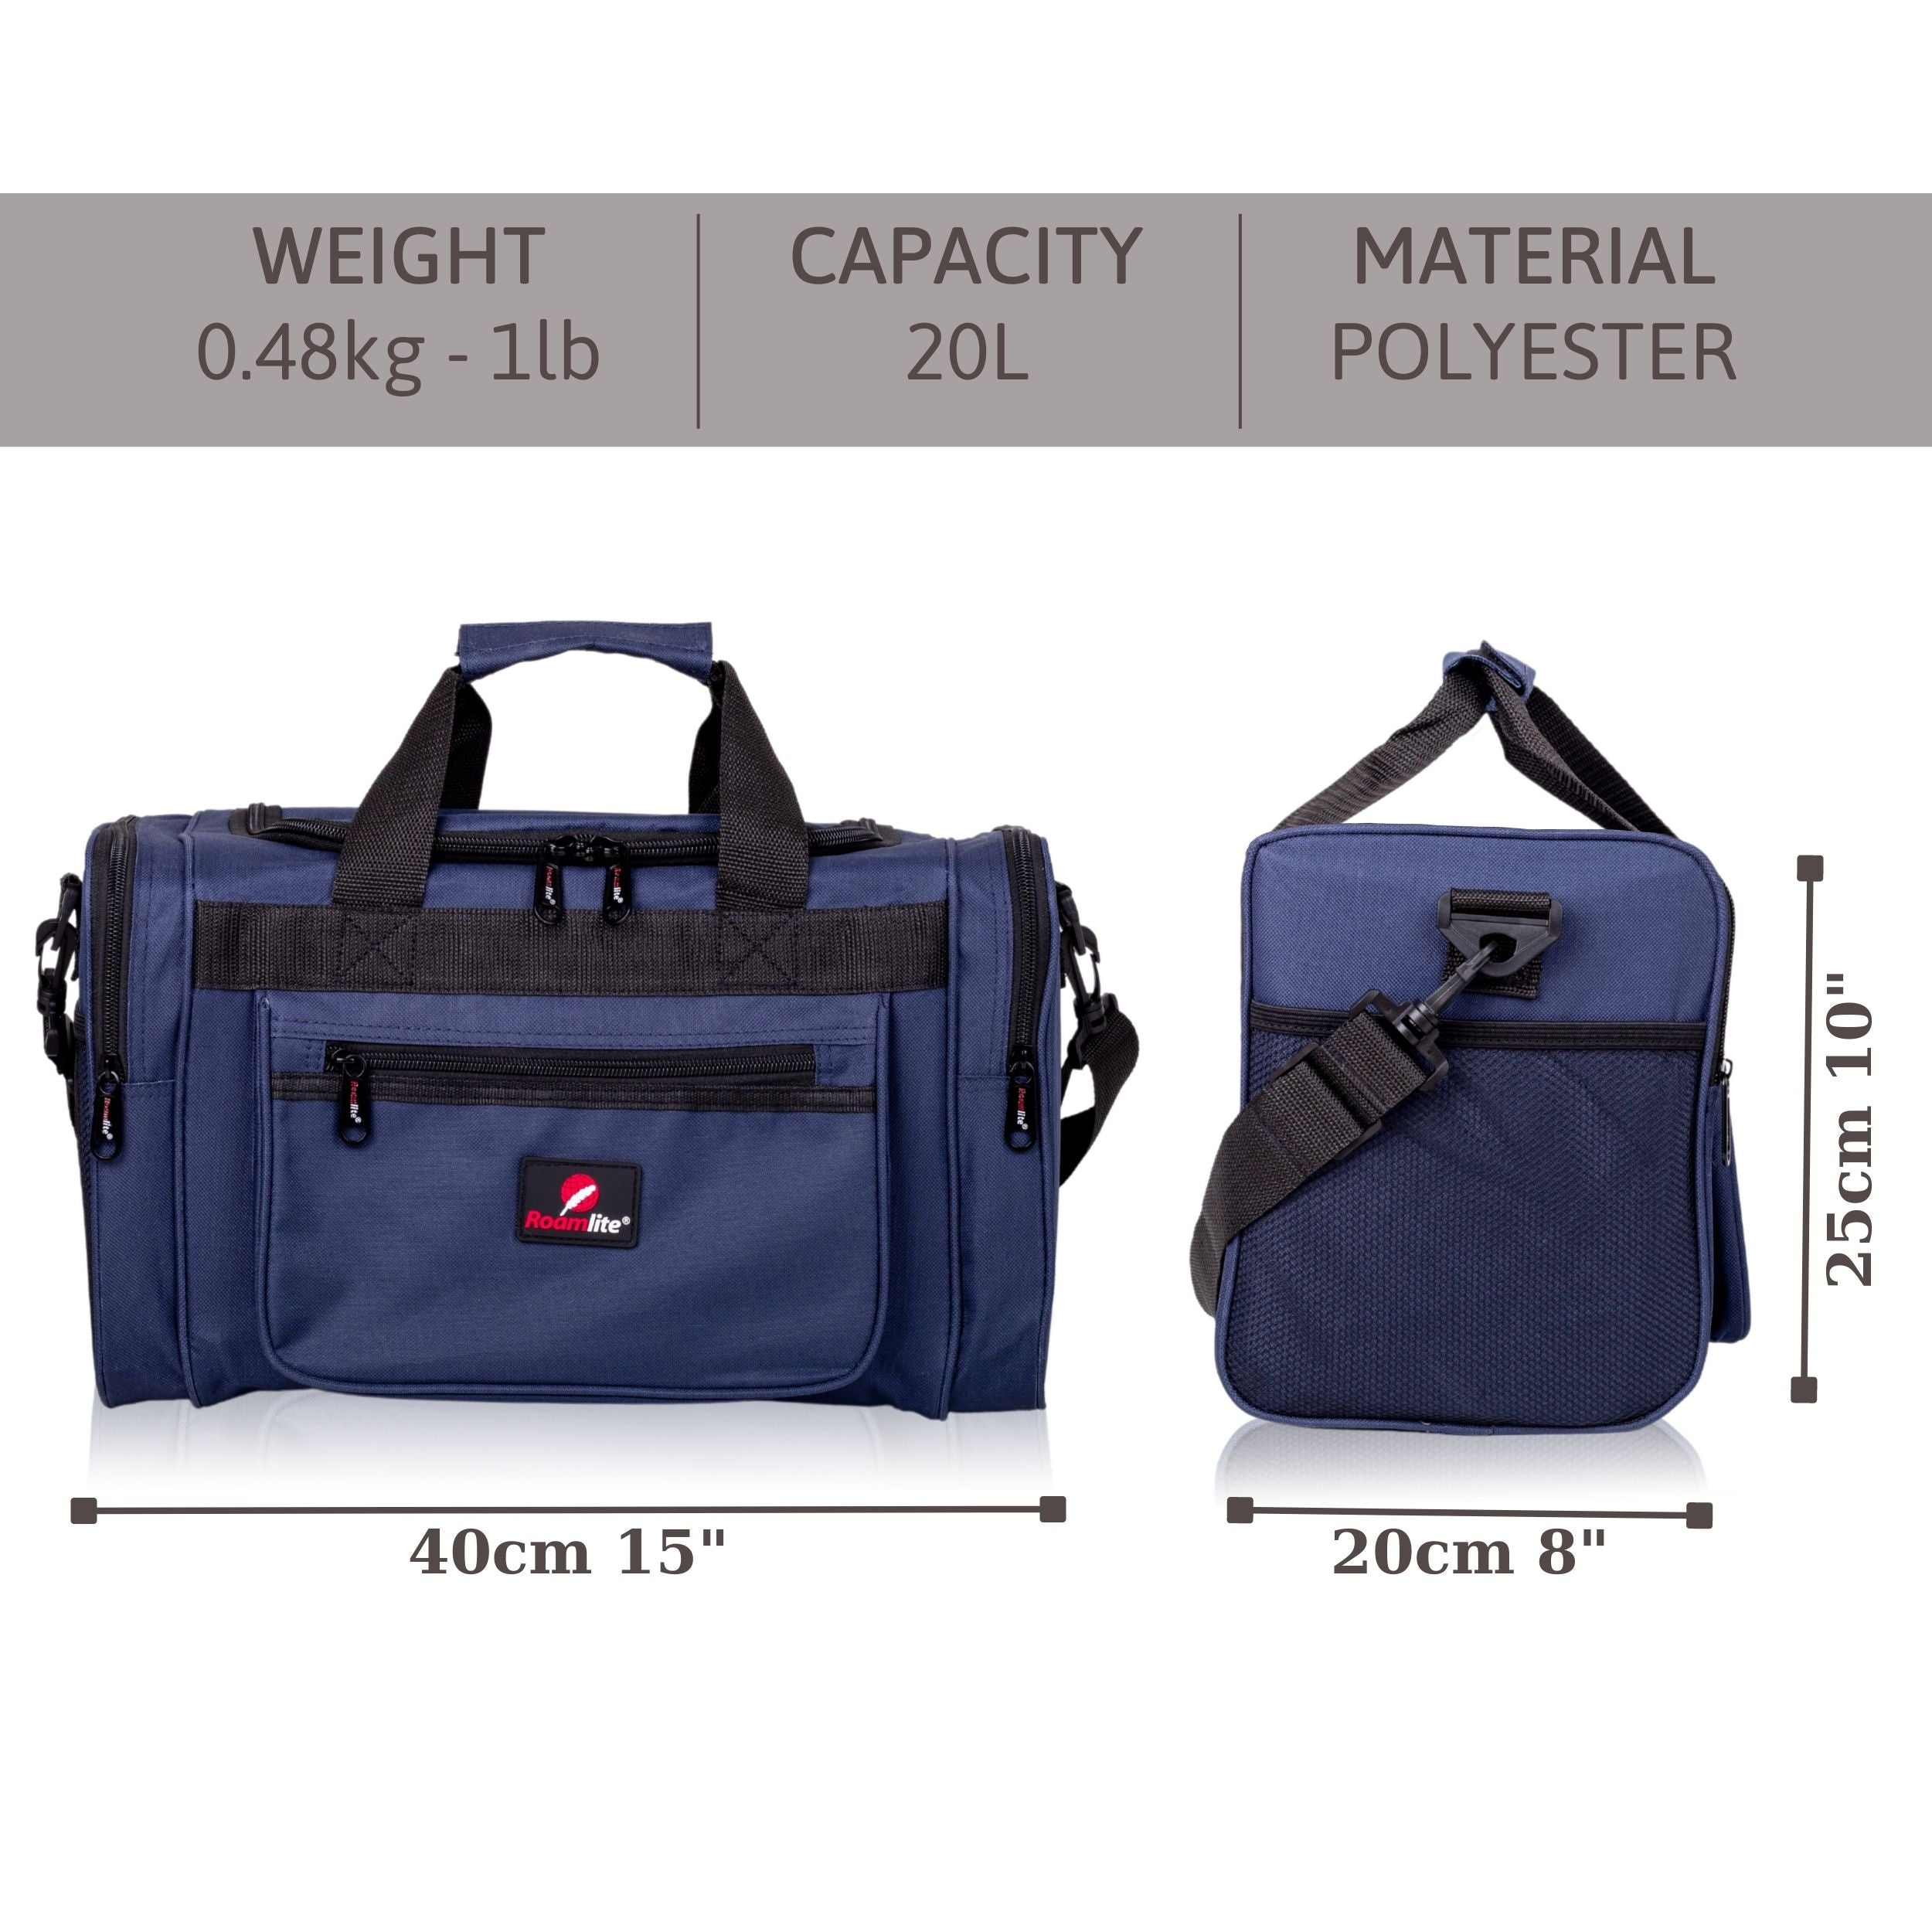 Hand Baggage Size Holdalls, Ryanair Carry on Small Travel Bags RL59